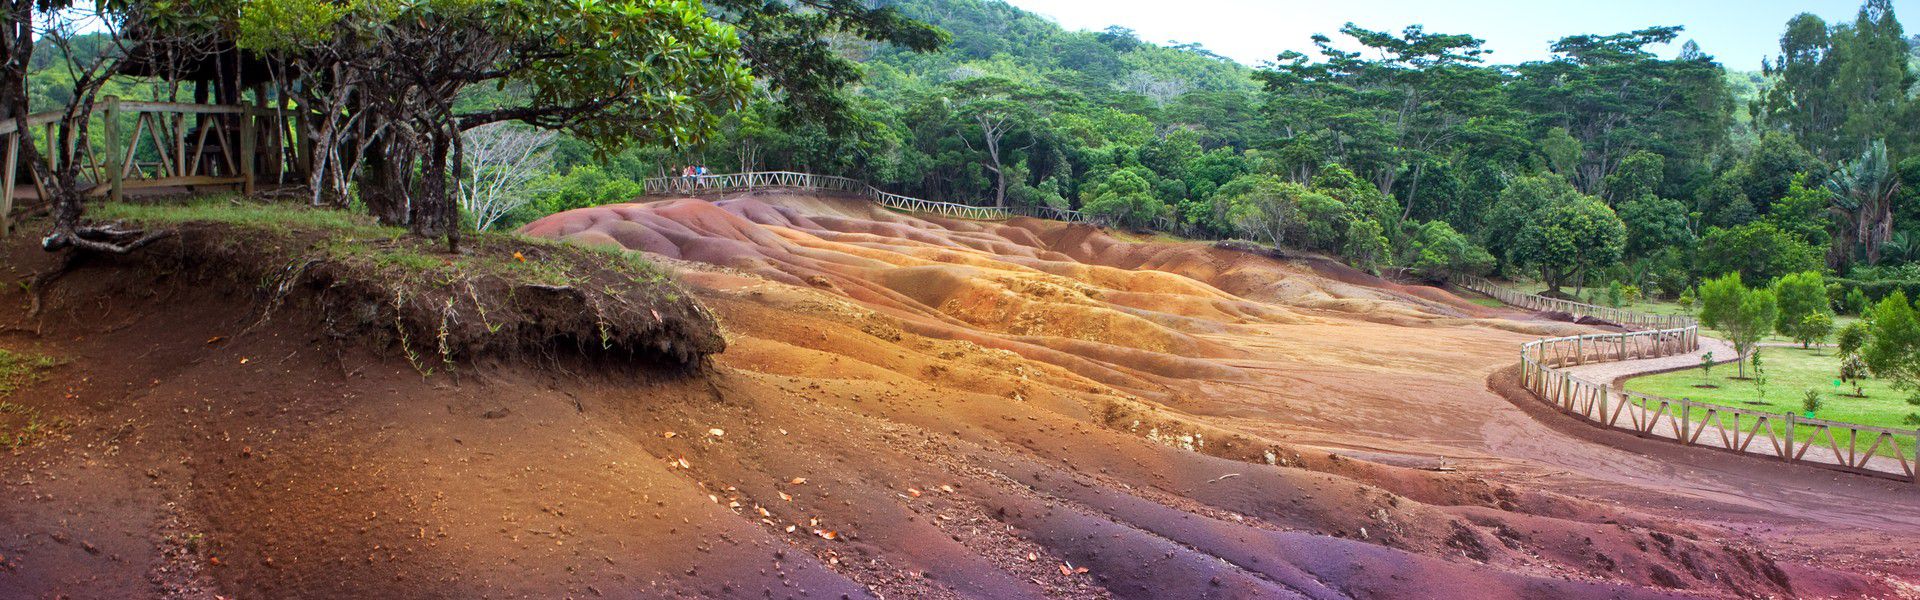 Looking for new discoveries? Opt for a colourful one!  The Seven Coloured Earth located in Chamarel is a sight of wonder. It attracts visitors from all around the globe, and quite understandably so. From a geological perspective, the lands of Chamarel have become a phenomenon which seems intriguing to many people despite scientific explanation of the causes and circumstances.